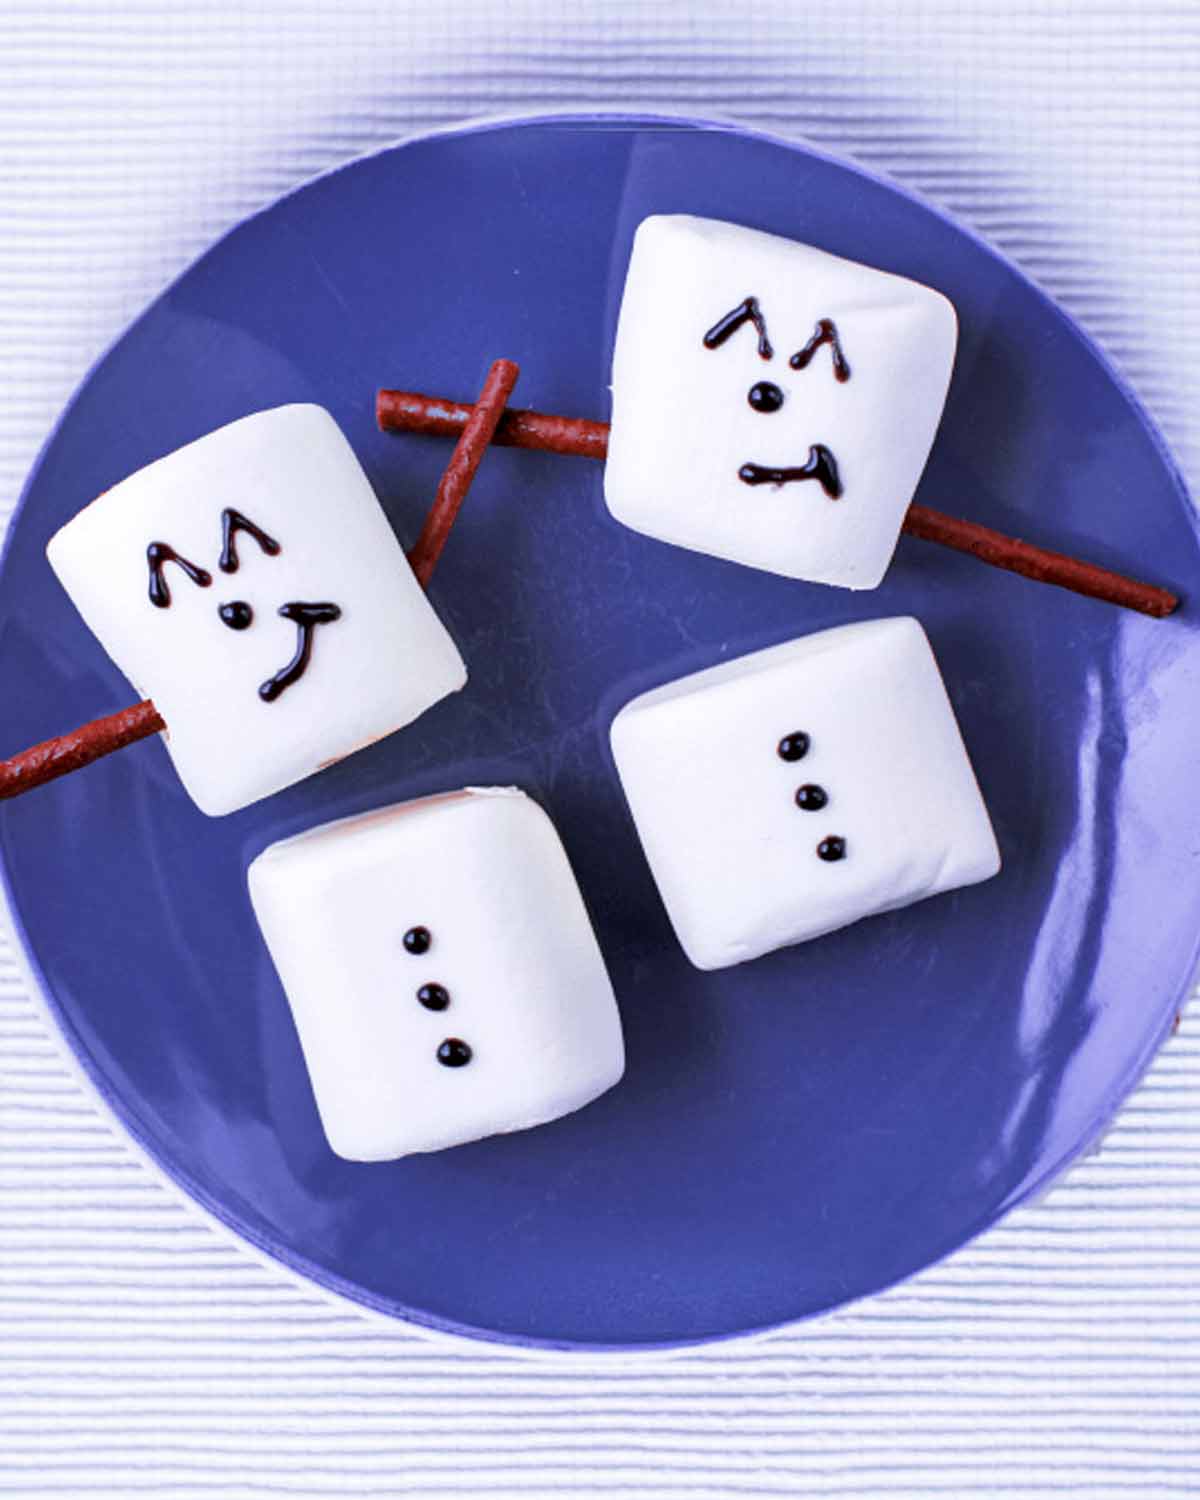 Marshmallows on a plate with icing and chocolate sticks making them look like snowmen.